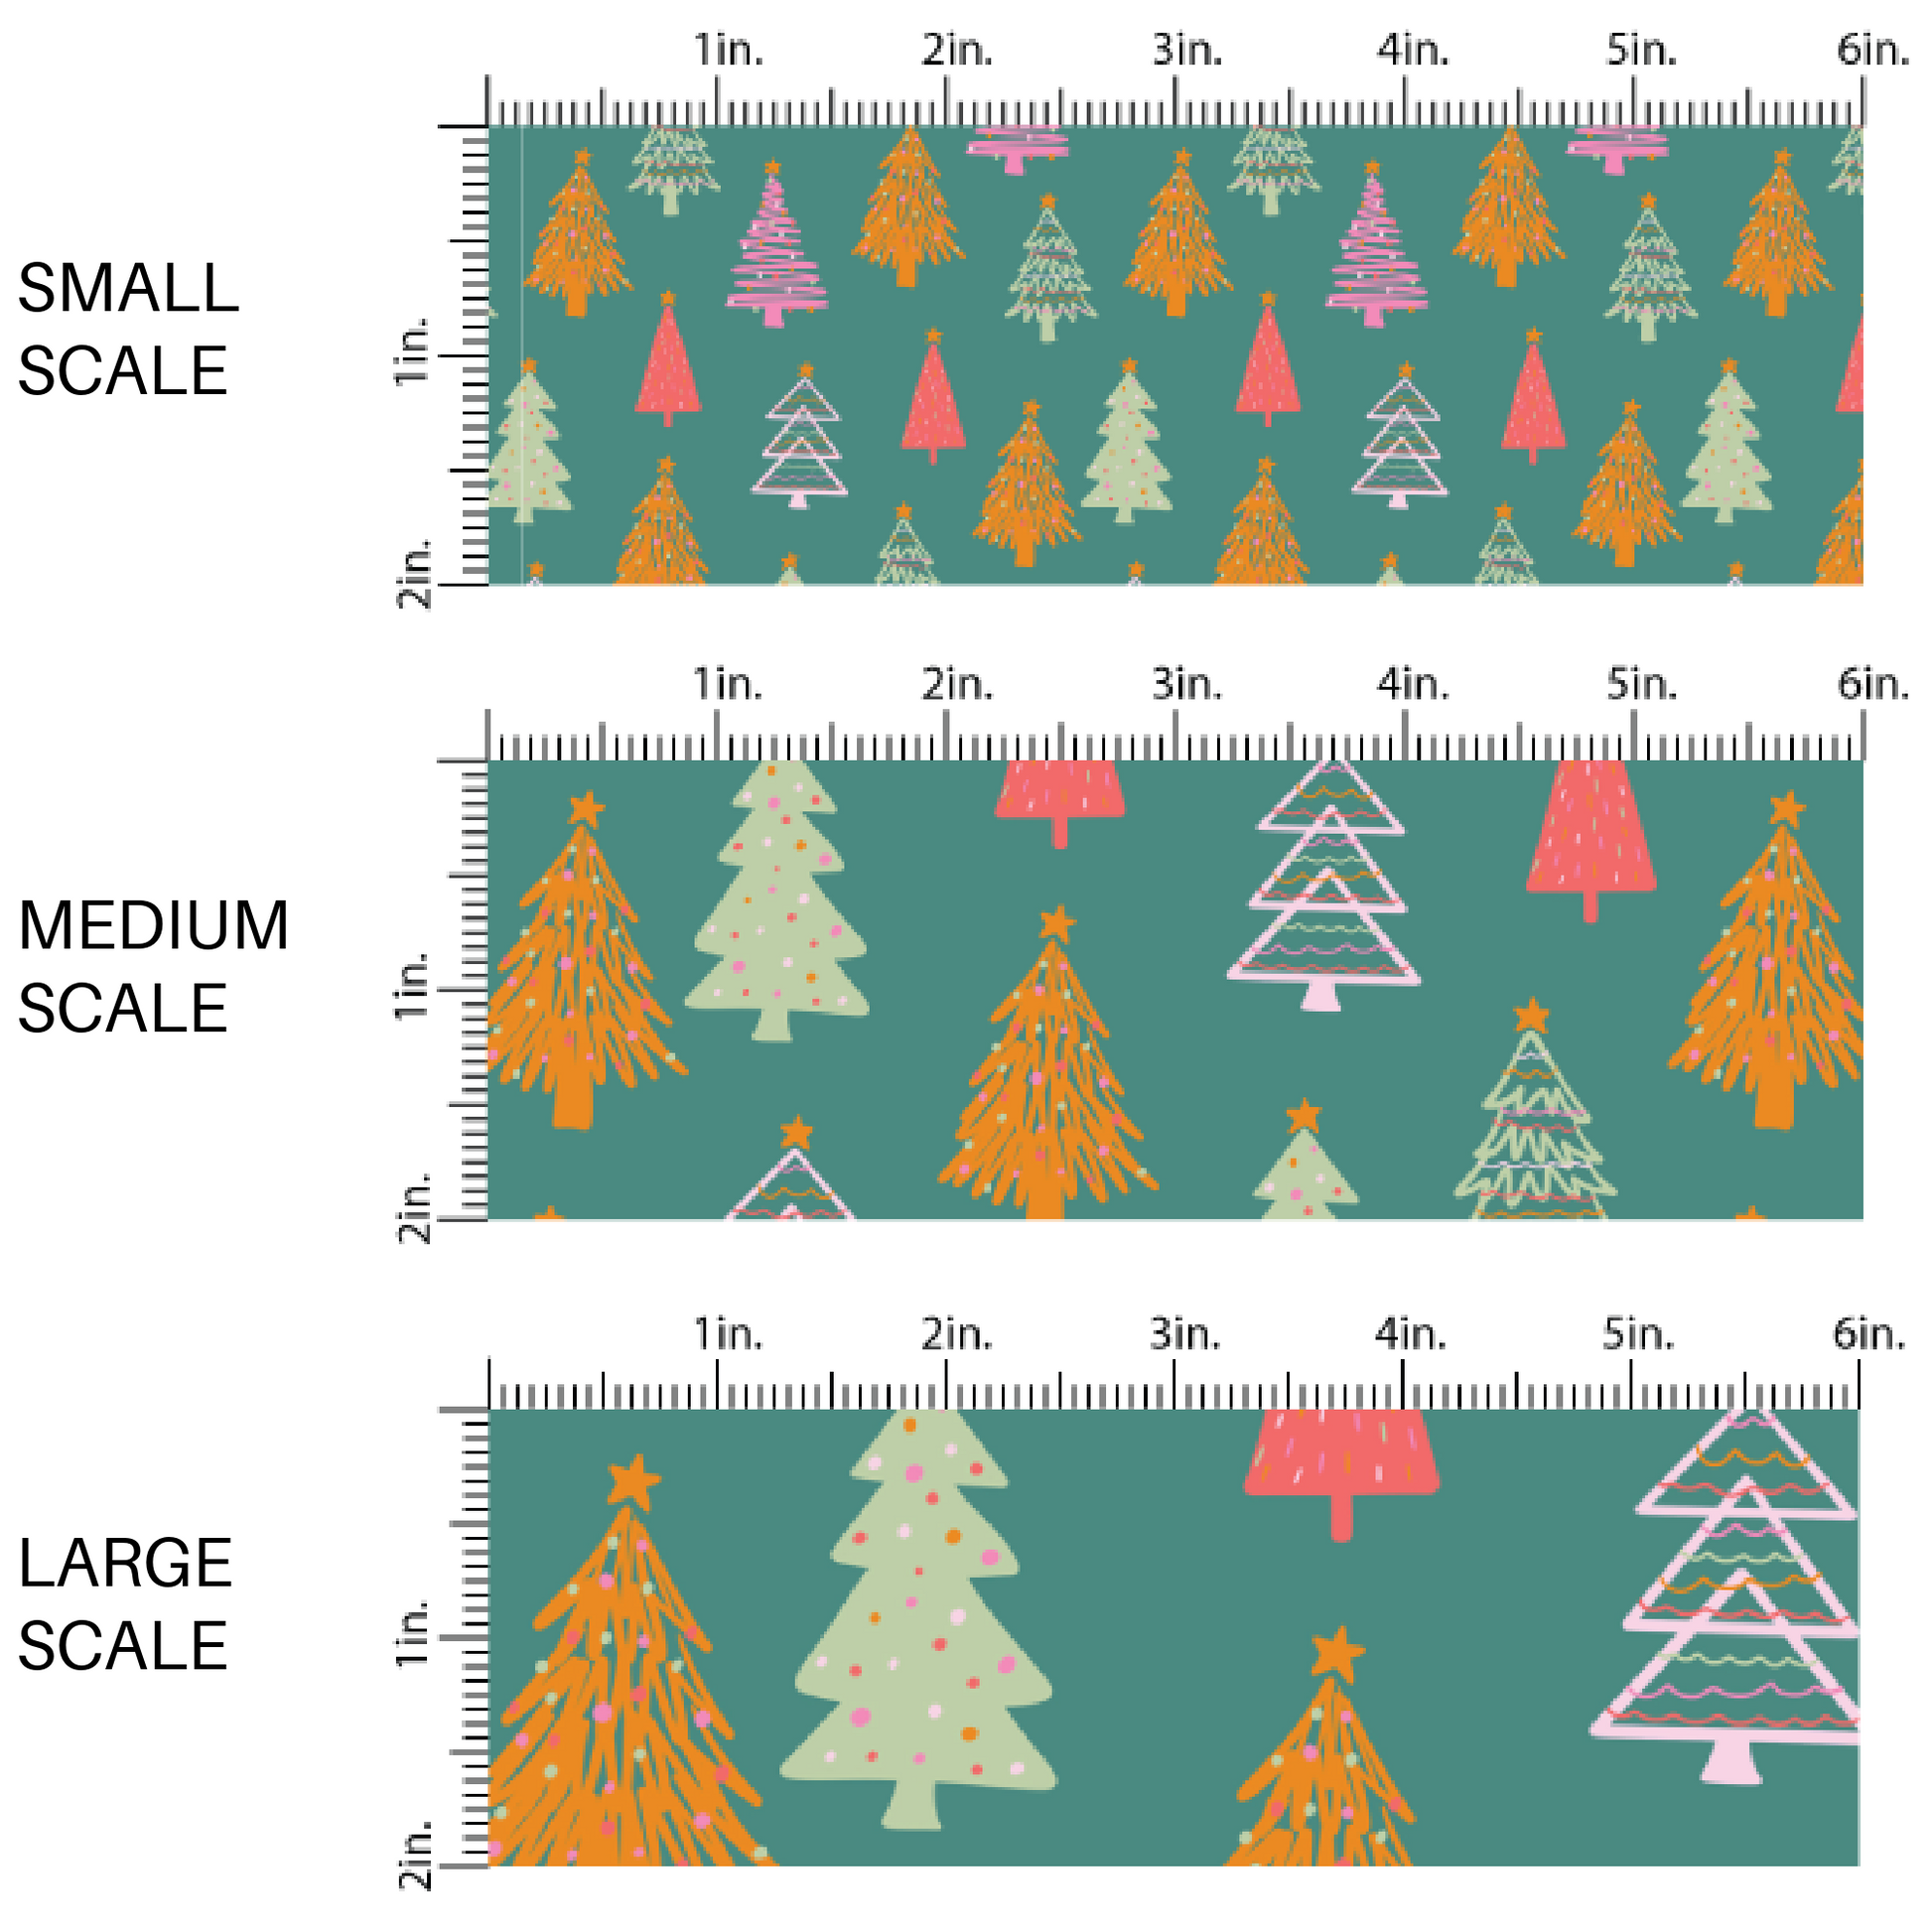 Doodled Christmas Trees on Green Christmas Fabric by the Yard scaled image guide.